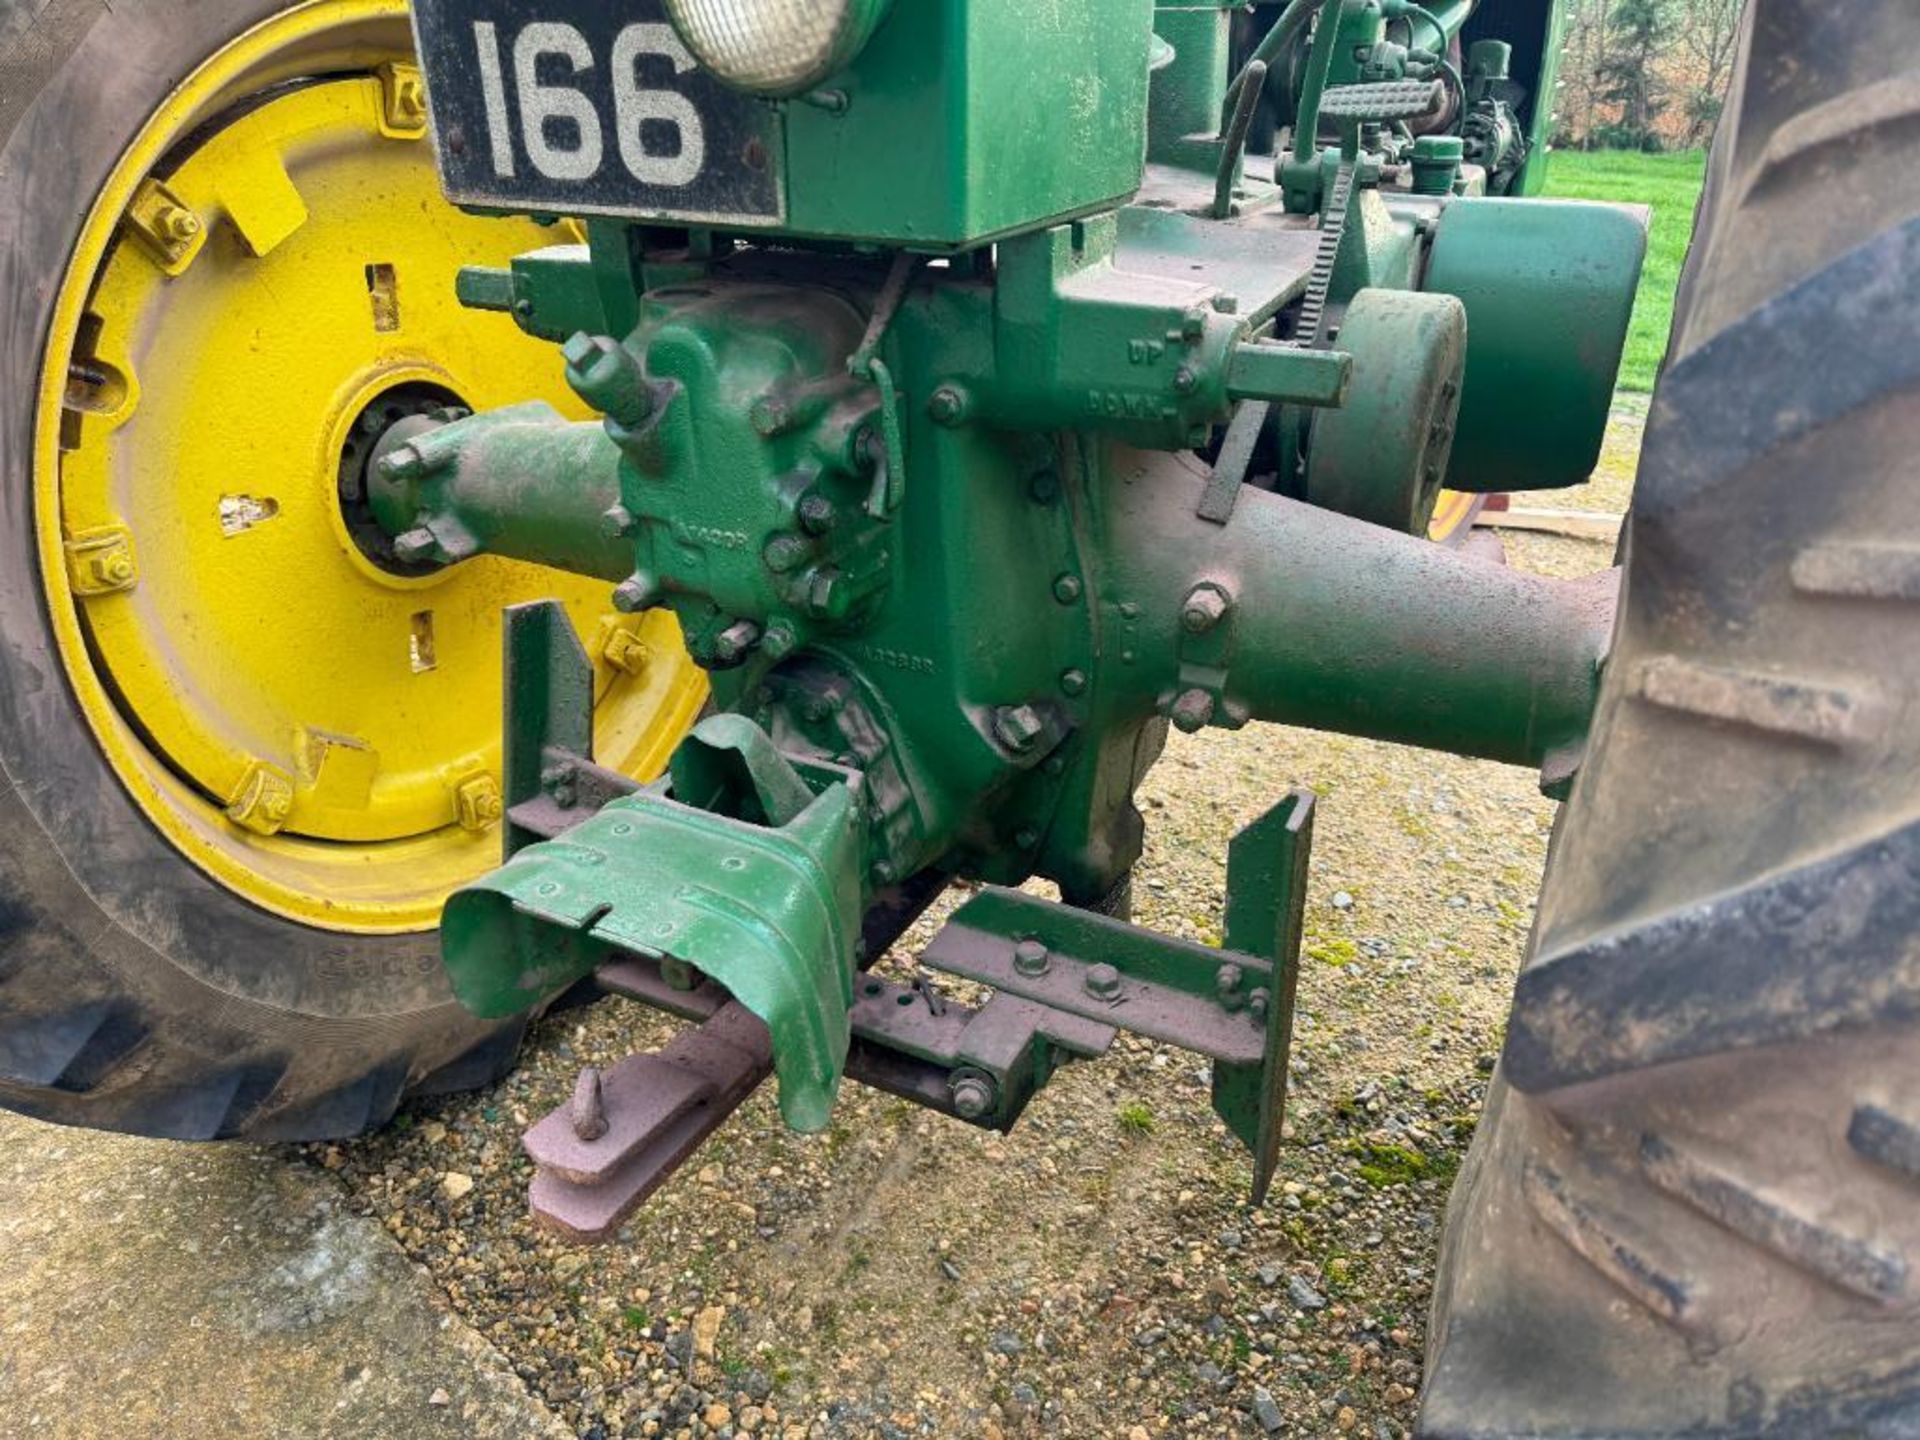 1948 John Deere Model A row crop tractor with side belt pulley, rear PTO and drawbar and twin front - Image 14 of 15